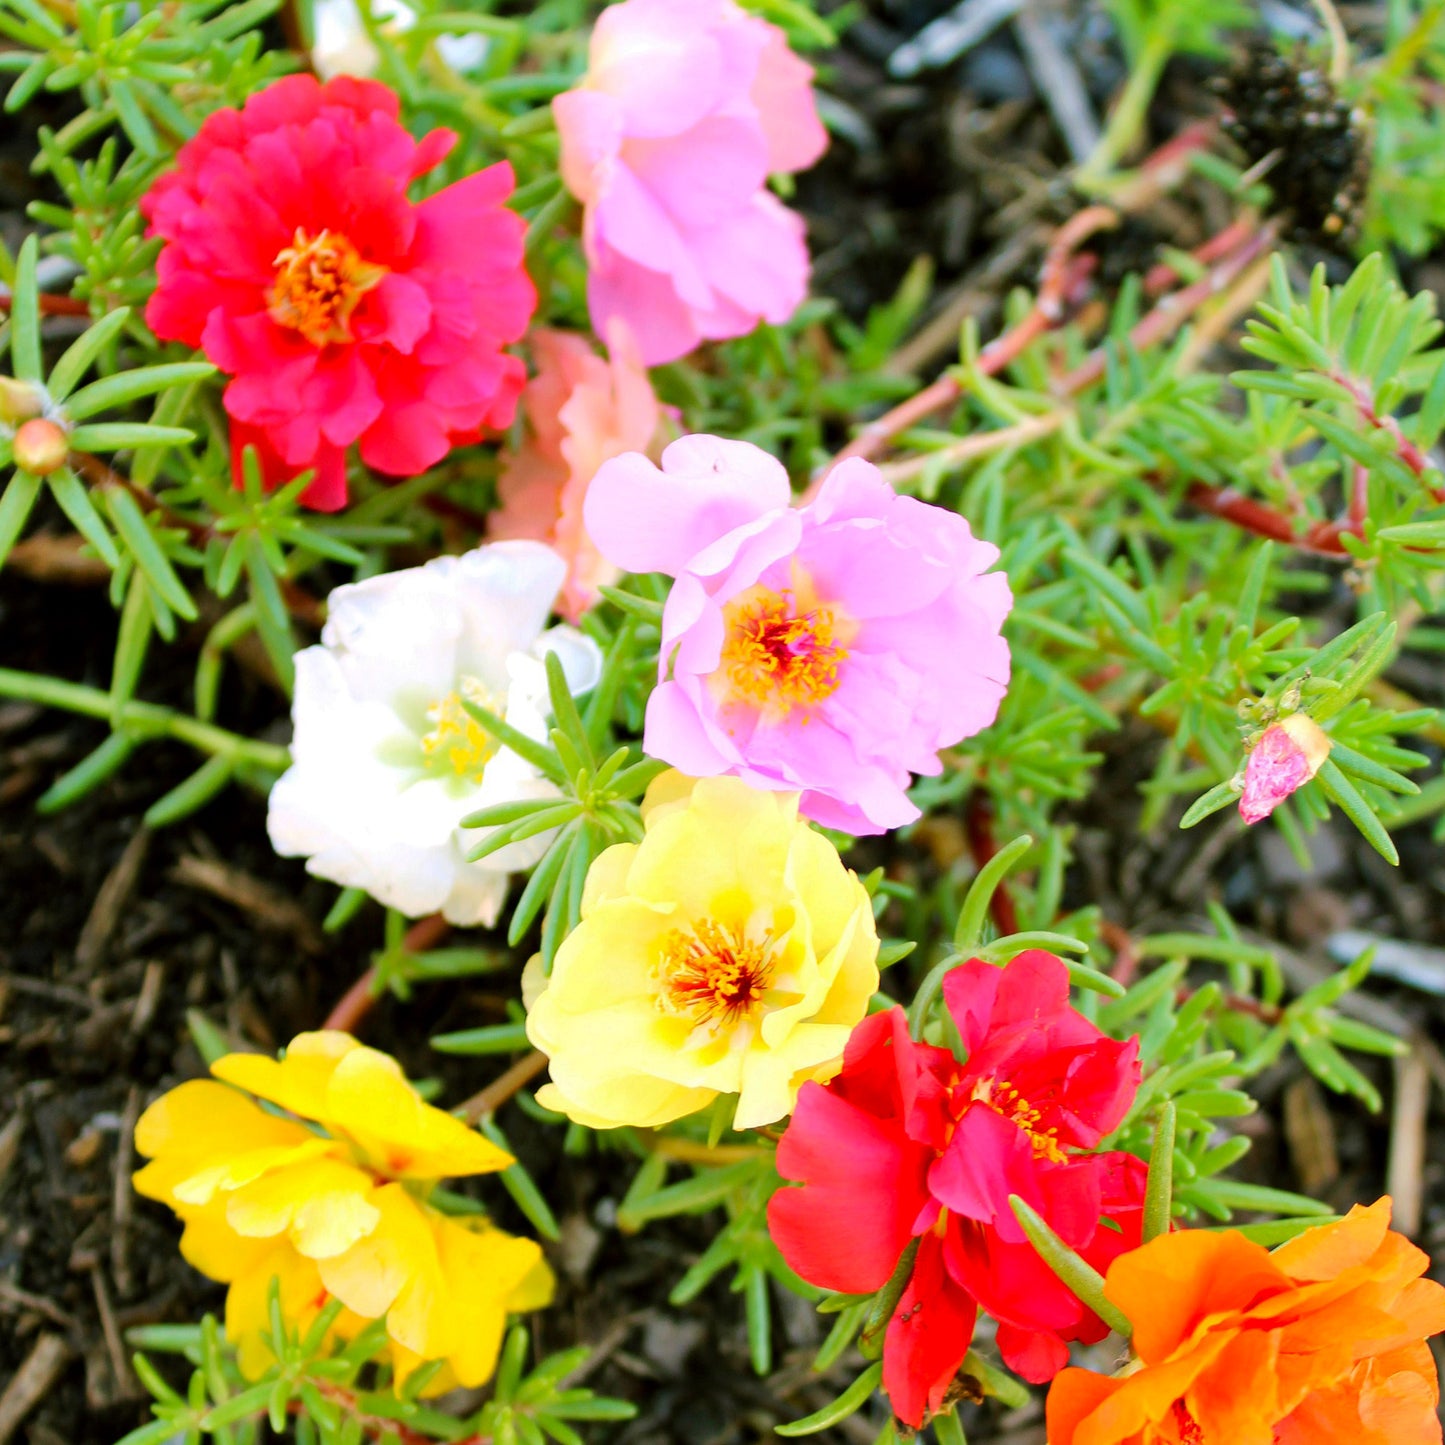 Portulaca Double Mixed Colors Moss Rose flower seeds fully matured and blooming their beautiful shades of pink, red, yellow, white and more.